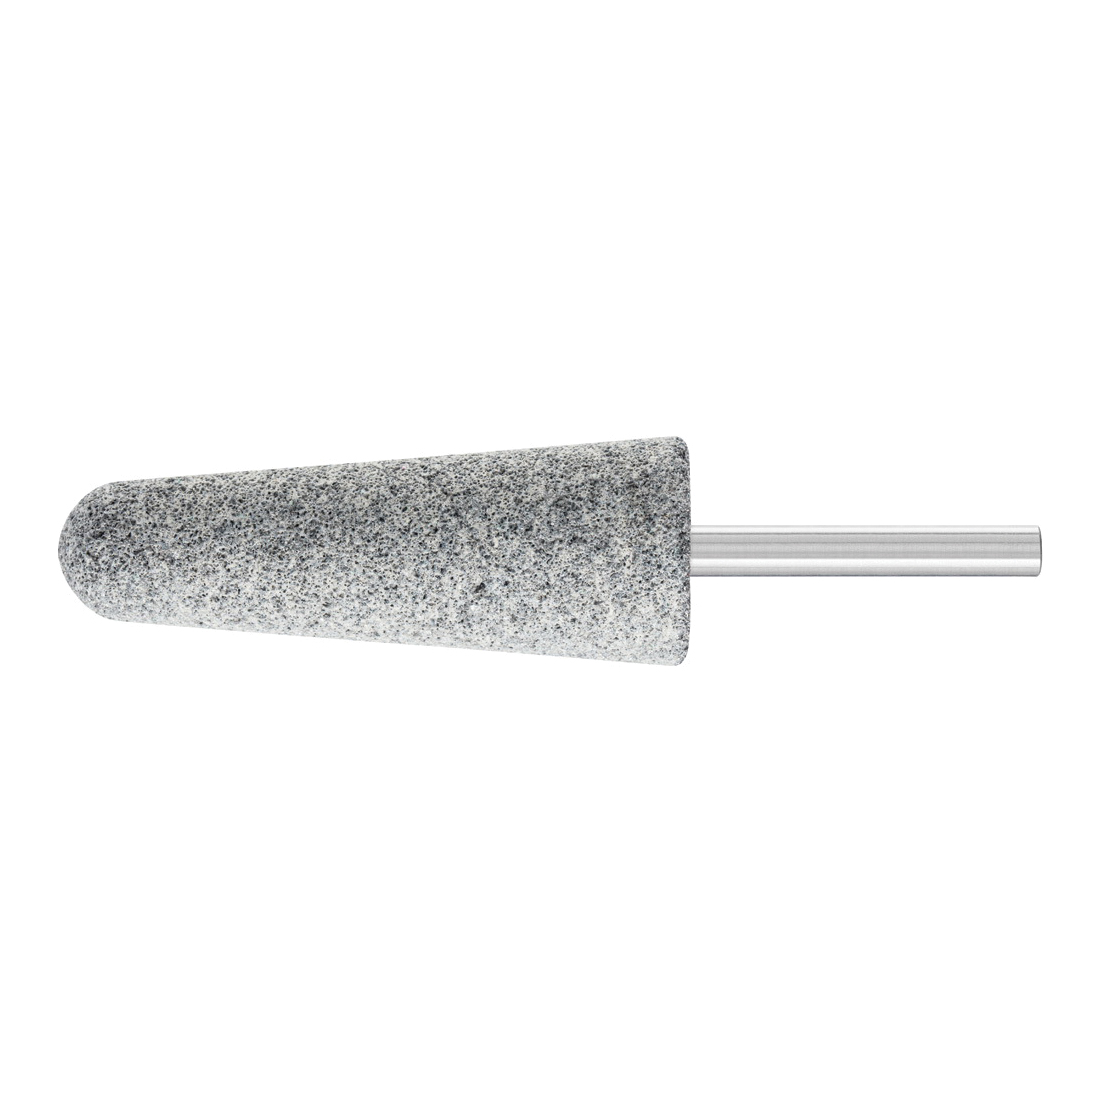 PFERD 31022 A Series Mounted Point, A3 Point, 1 in Dia x 2-3/4 in L Head, 1/4 in Dia Shank